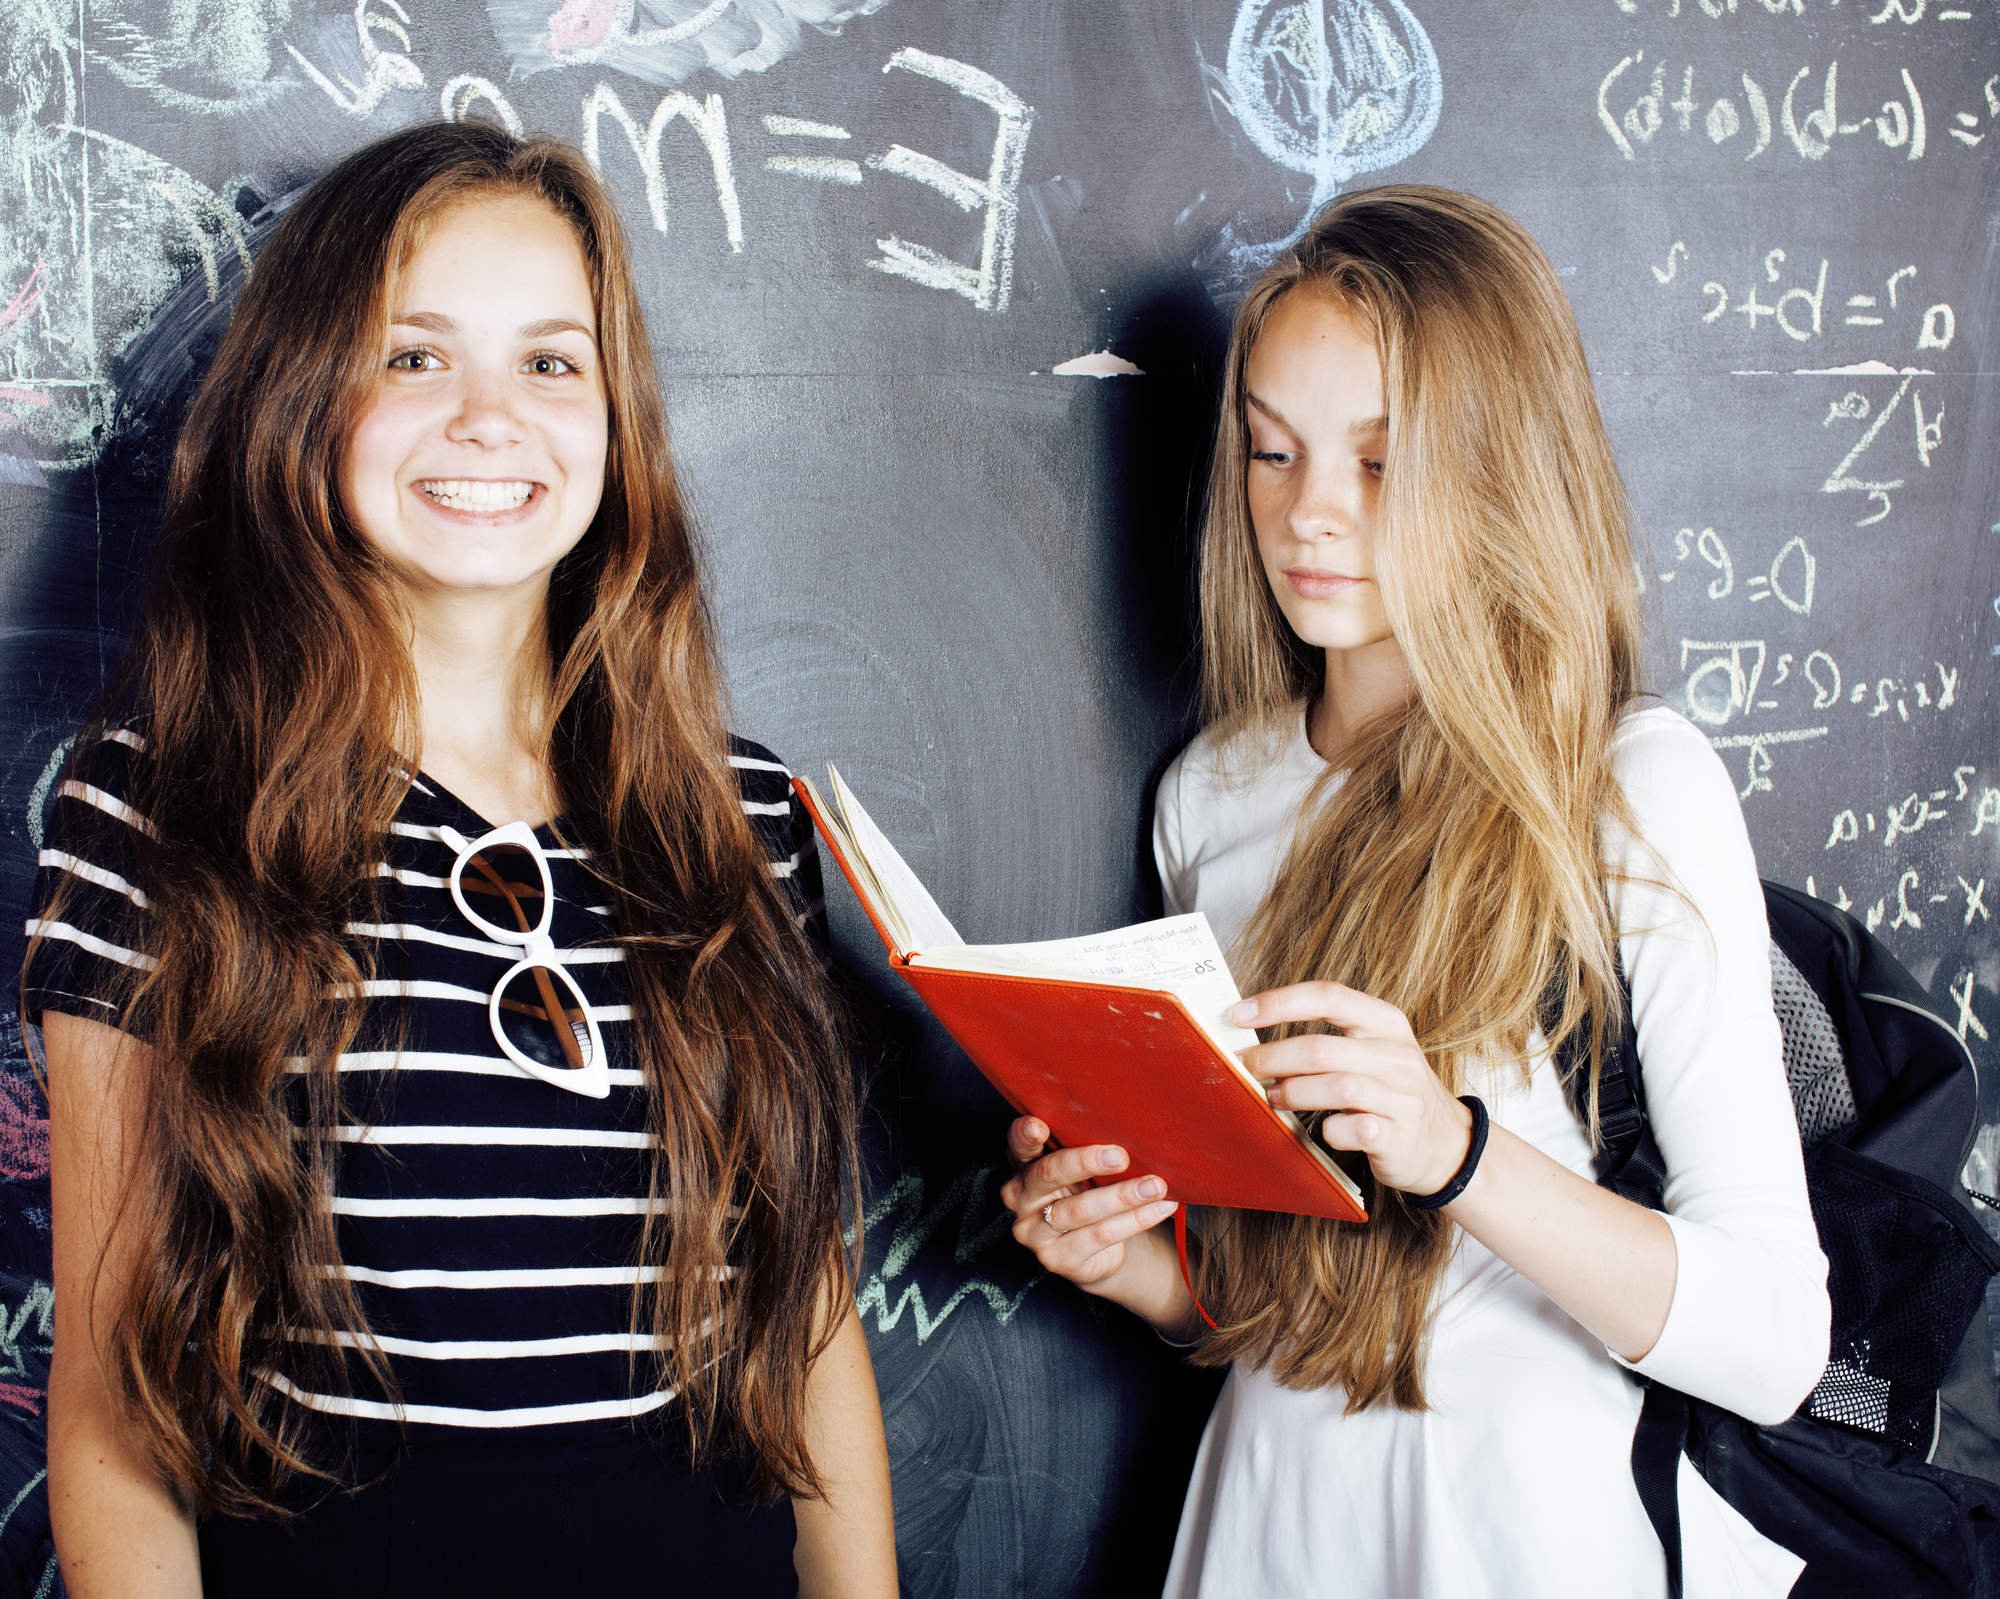 back to school after summer vacations, two teen real girls in classroom with blackboard painted together close up